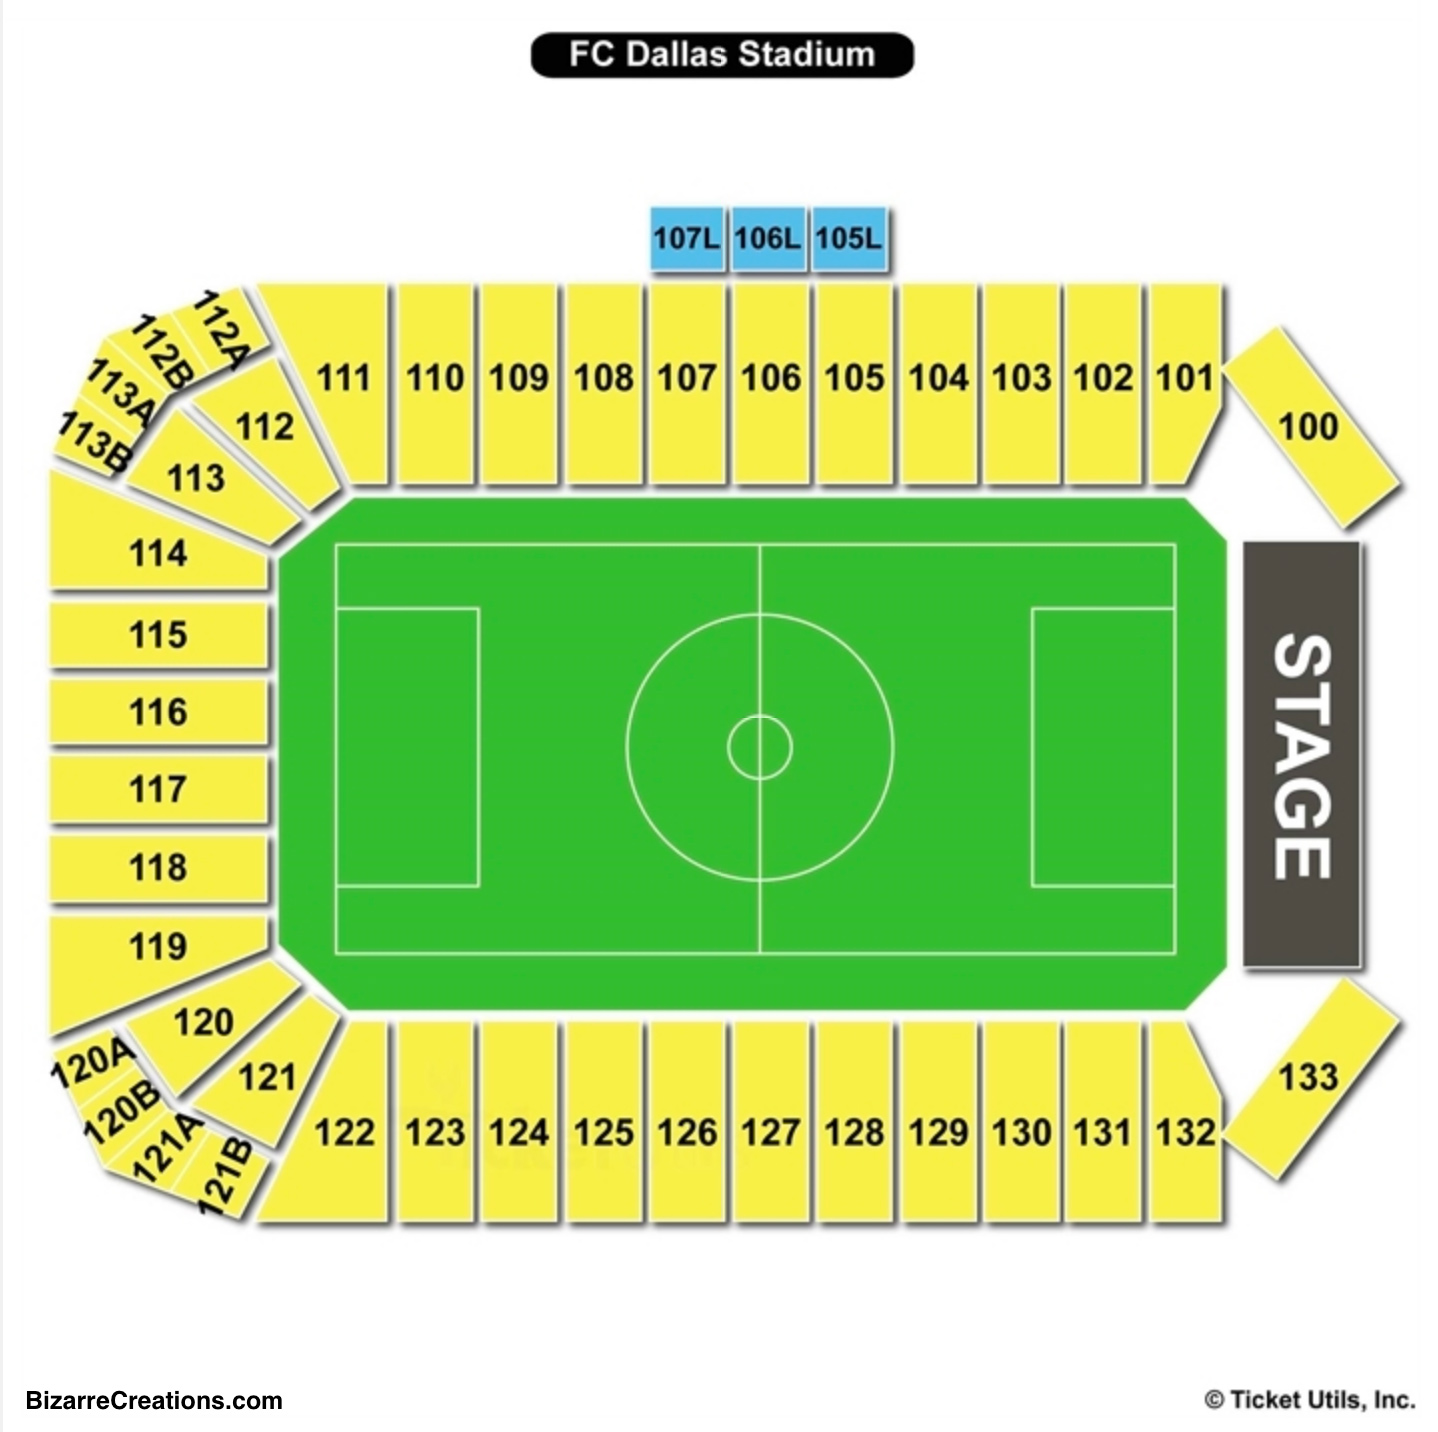 Toyota Stadium Seating Chart With Seat Numbers